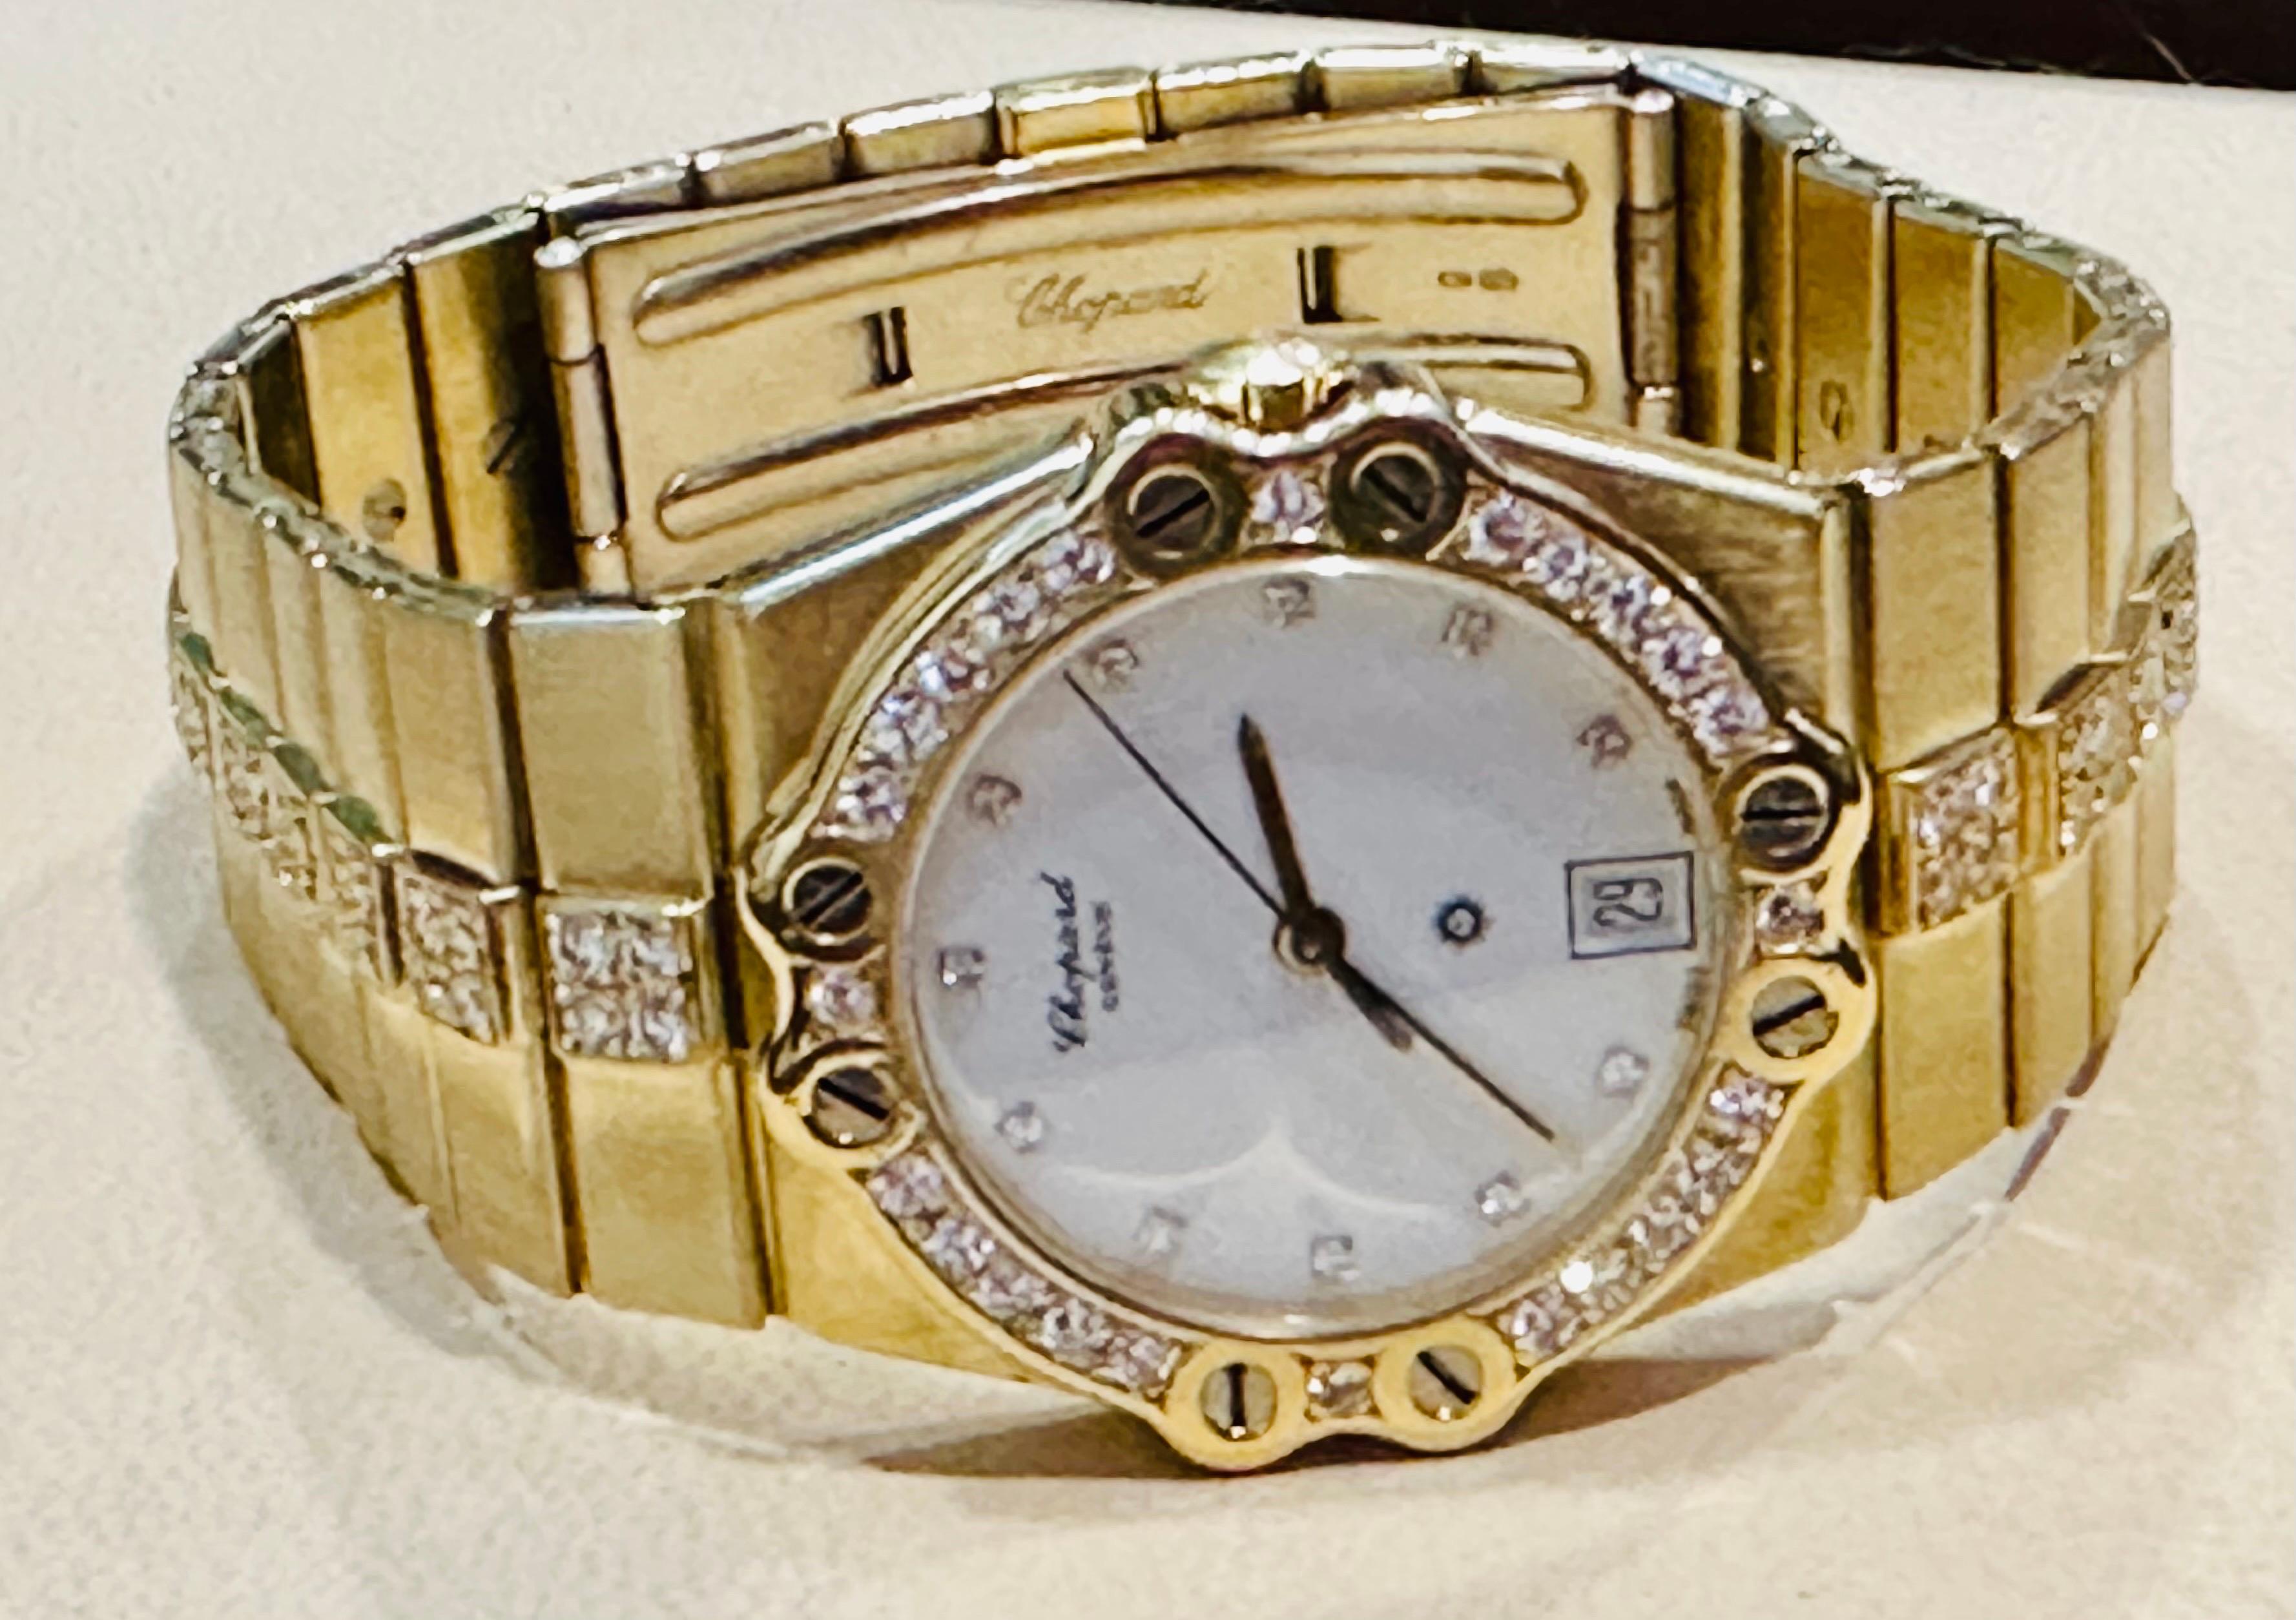 Chopard Factory Diamond 18 Karat Yellow Gold 153 Grams  Diamond Belt Watch with date display
H2612
# 13883
2171
Swiss Made
- White Dial
-  Diamonds on each hr Inside Dial
- Diamonds Set on Bezel
- diamonds on the belt /Bracelet
- Battery Operated